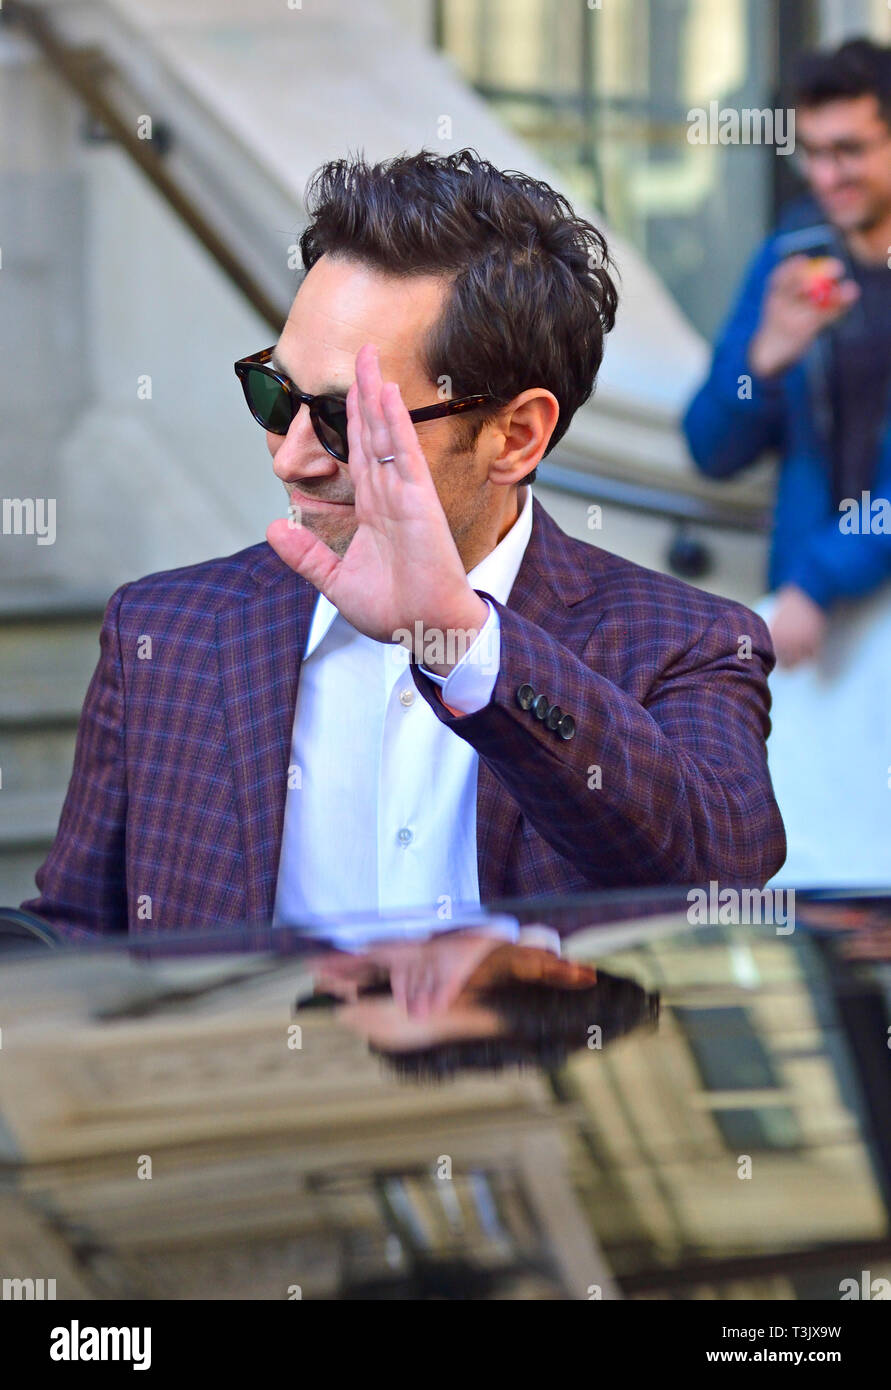 London, UK. 10th Apr, 2019. American actor Paul Rudd, in London for the premiere of 'Avengers-Endgame', leaves the Corinthia Hotel in Whitehall Place, London. Credit: PjrFoto/Alamy Live News Stock Photo